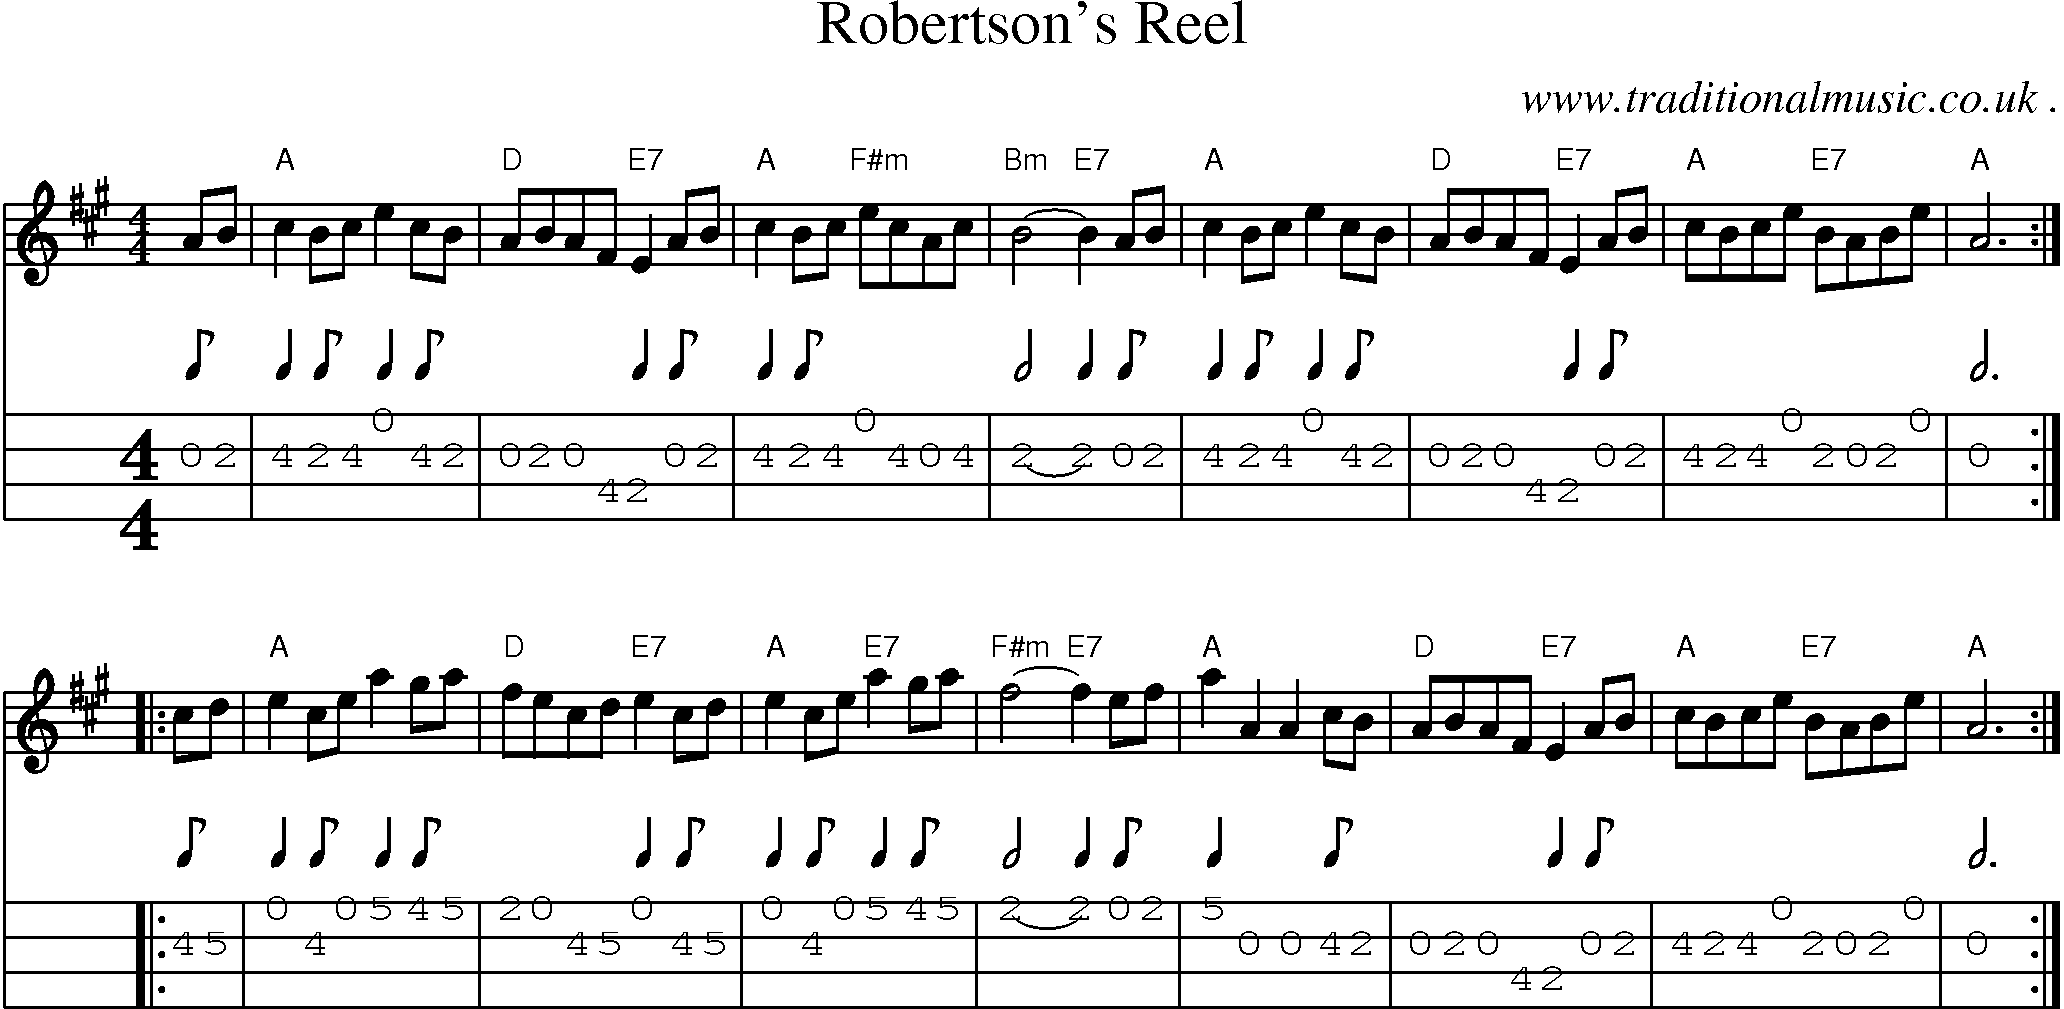 Music Score and Mandolin Tabs for Robertsons Reel